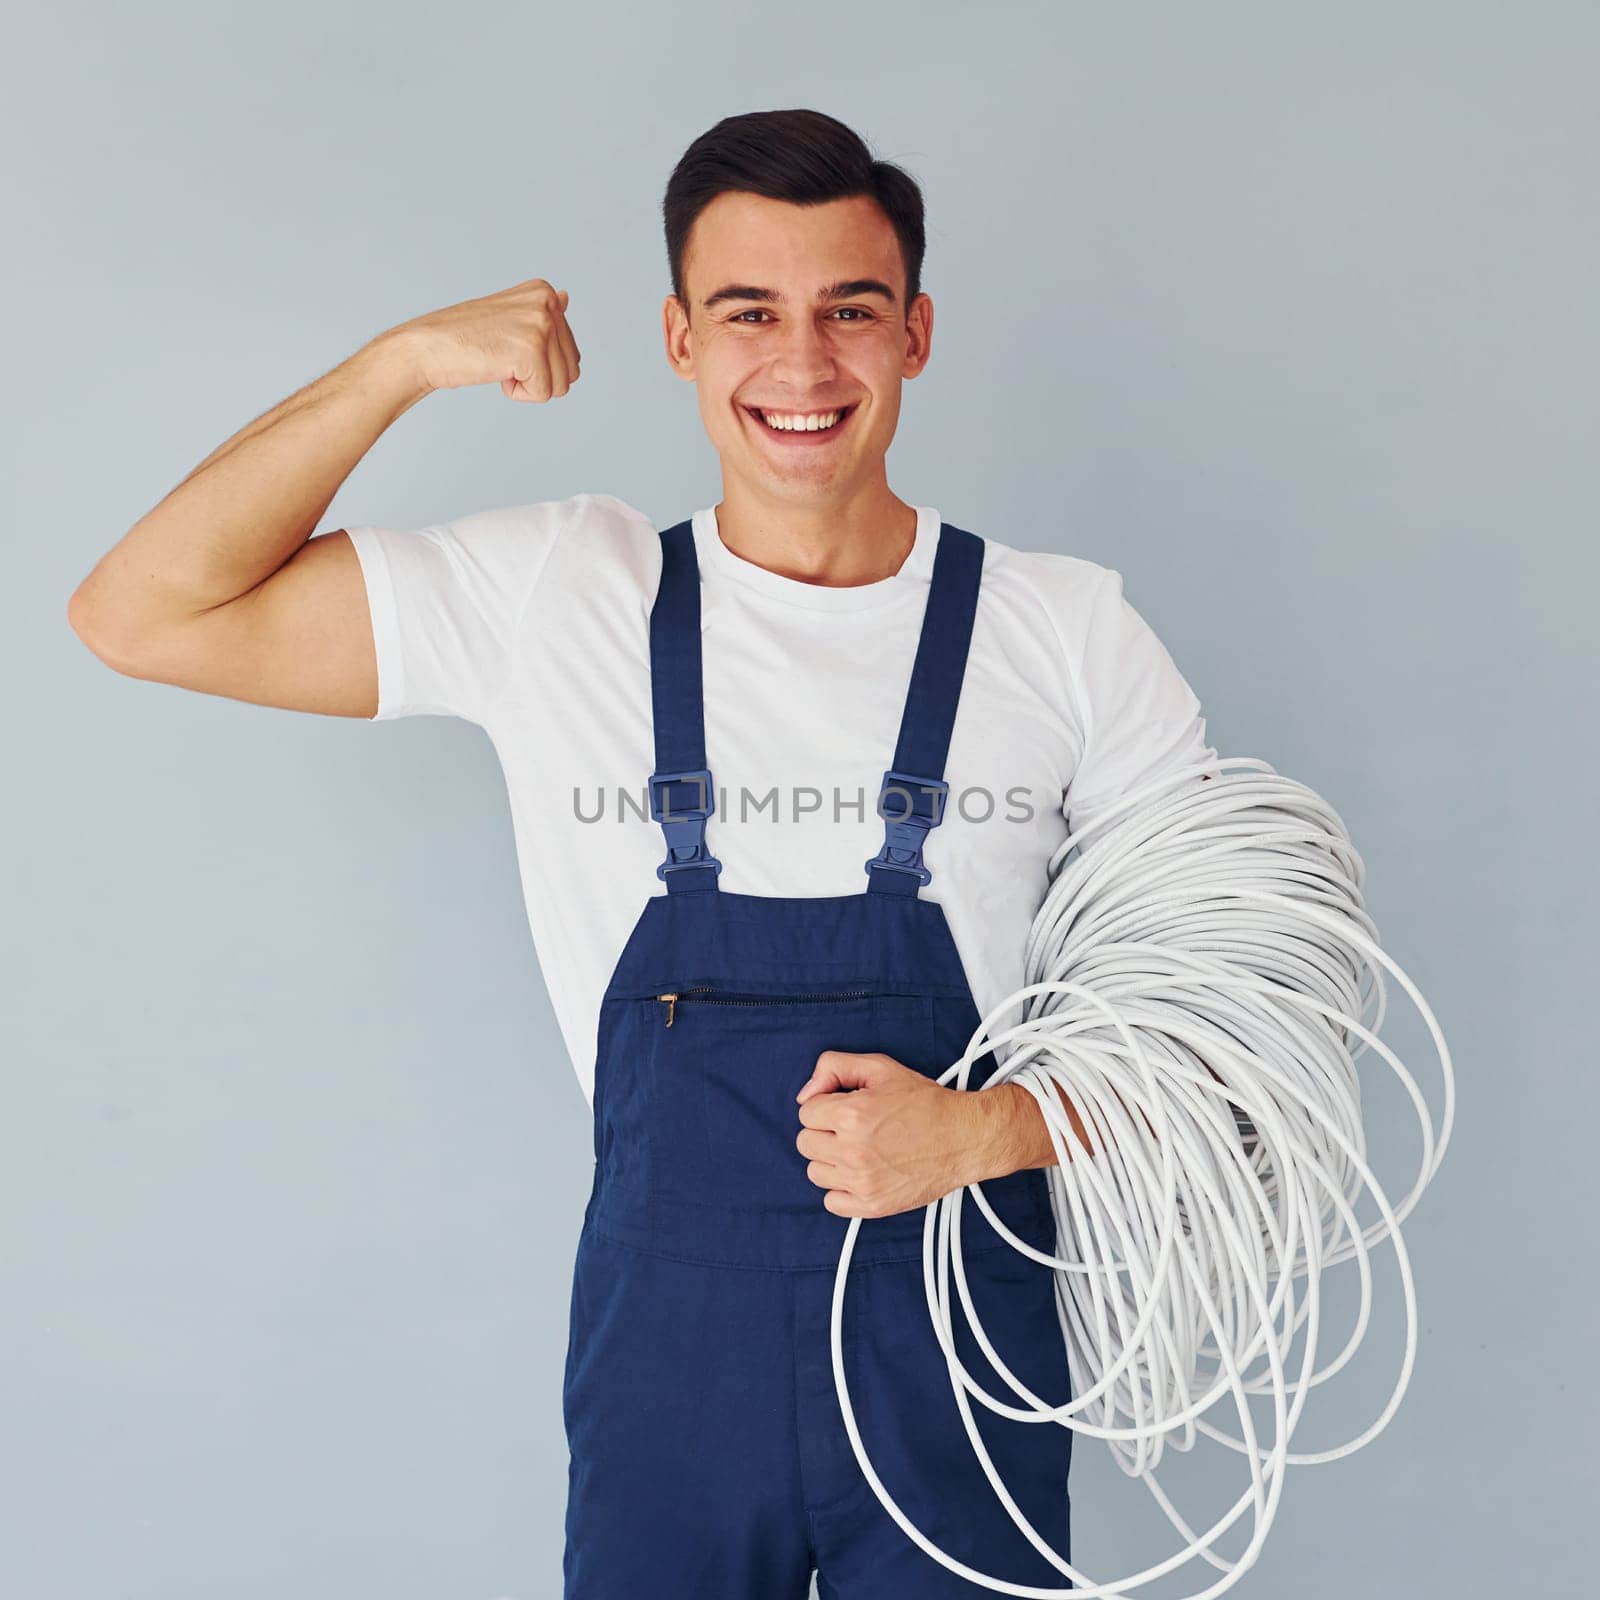 Holds cable. Male worker in blue uniform standing inside of studio against white background.